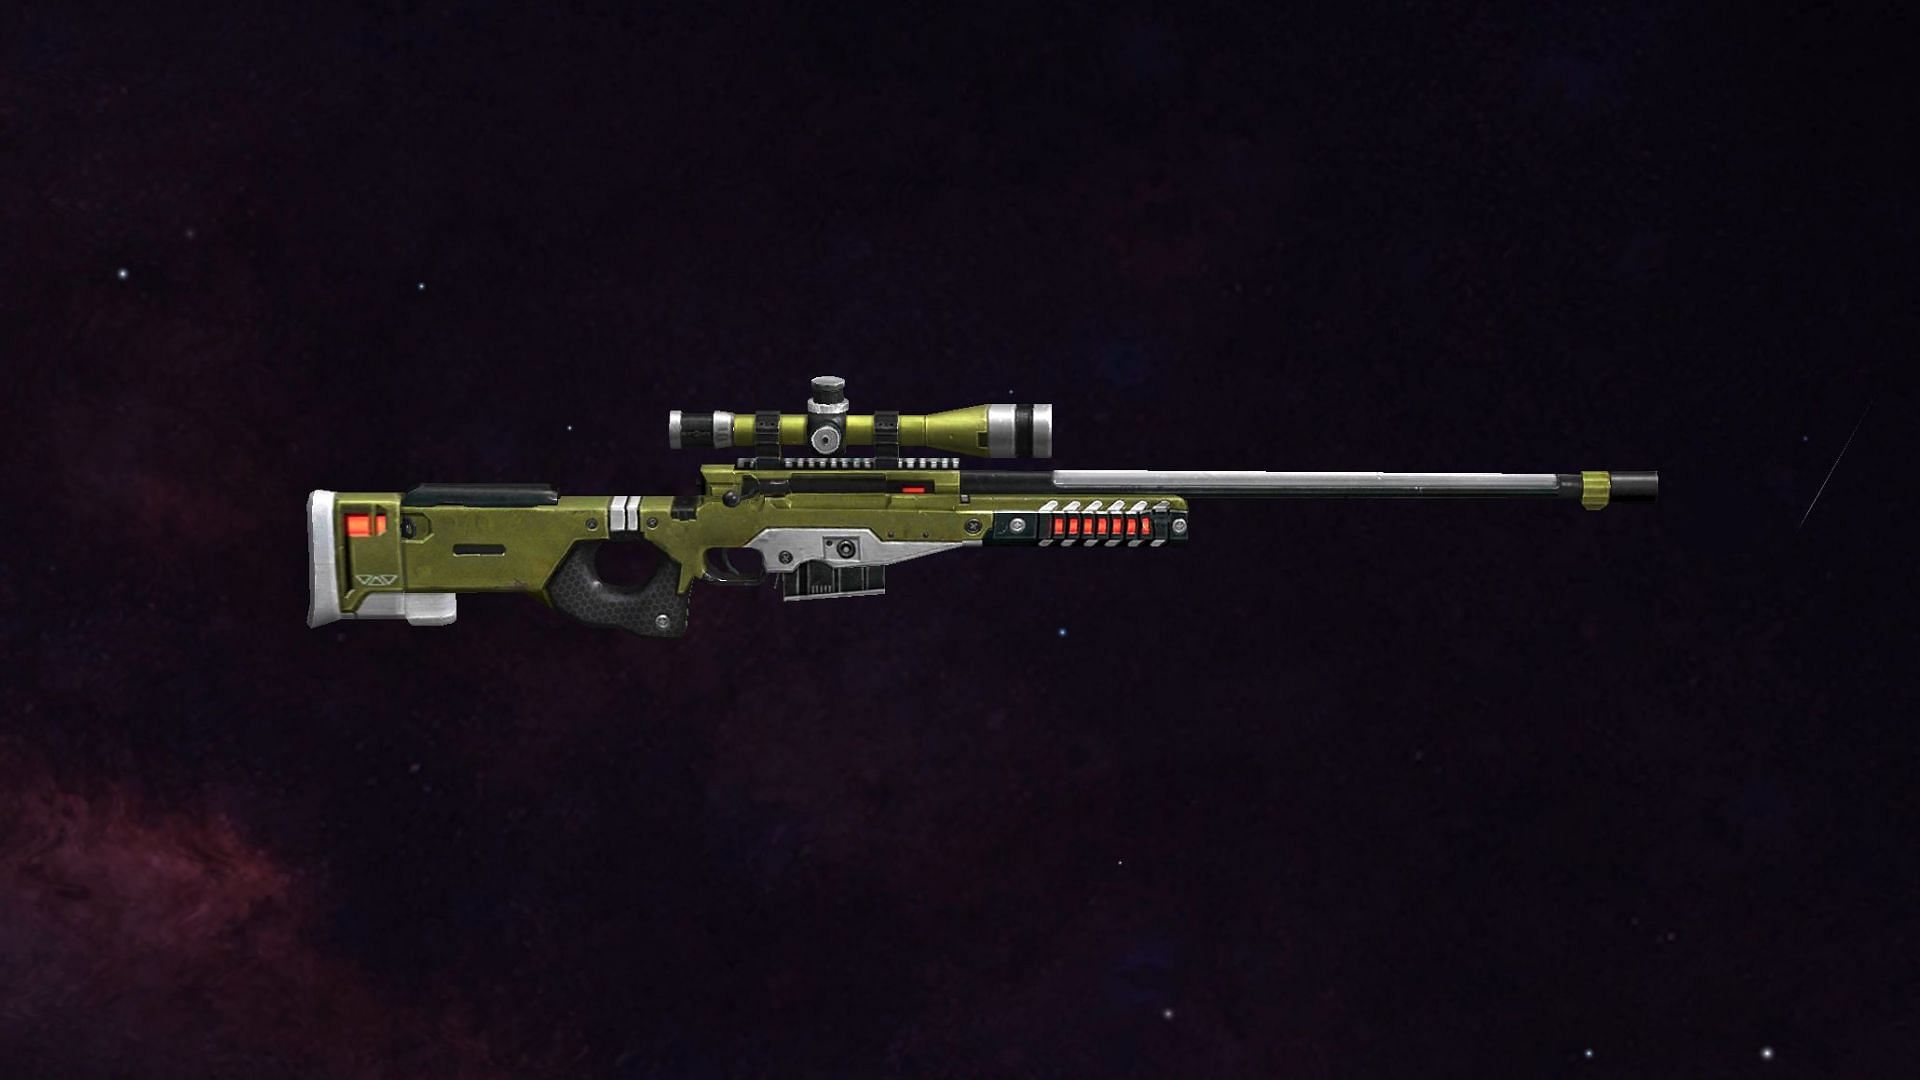 The Justice Fighter Weapon Loot Crate can give a themed gun skin (Image via Free Fire)